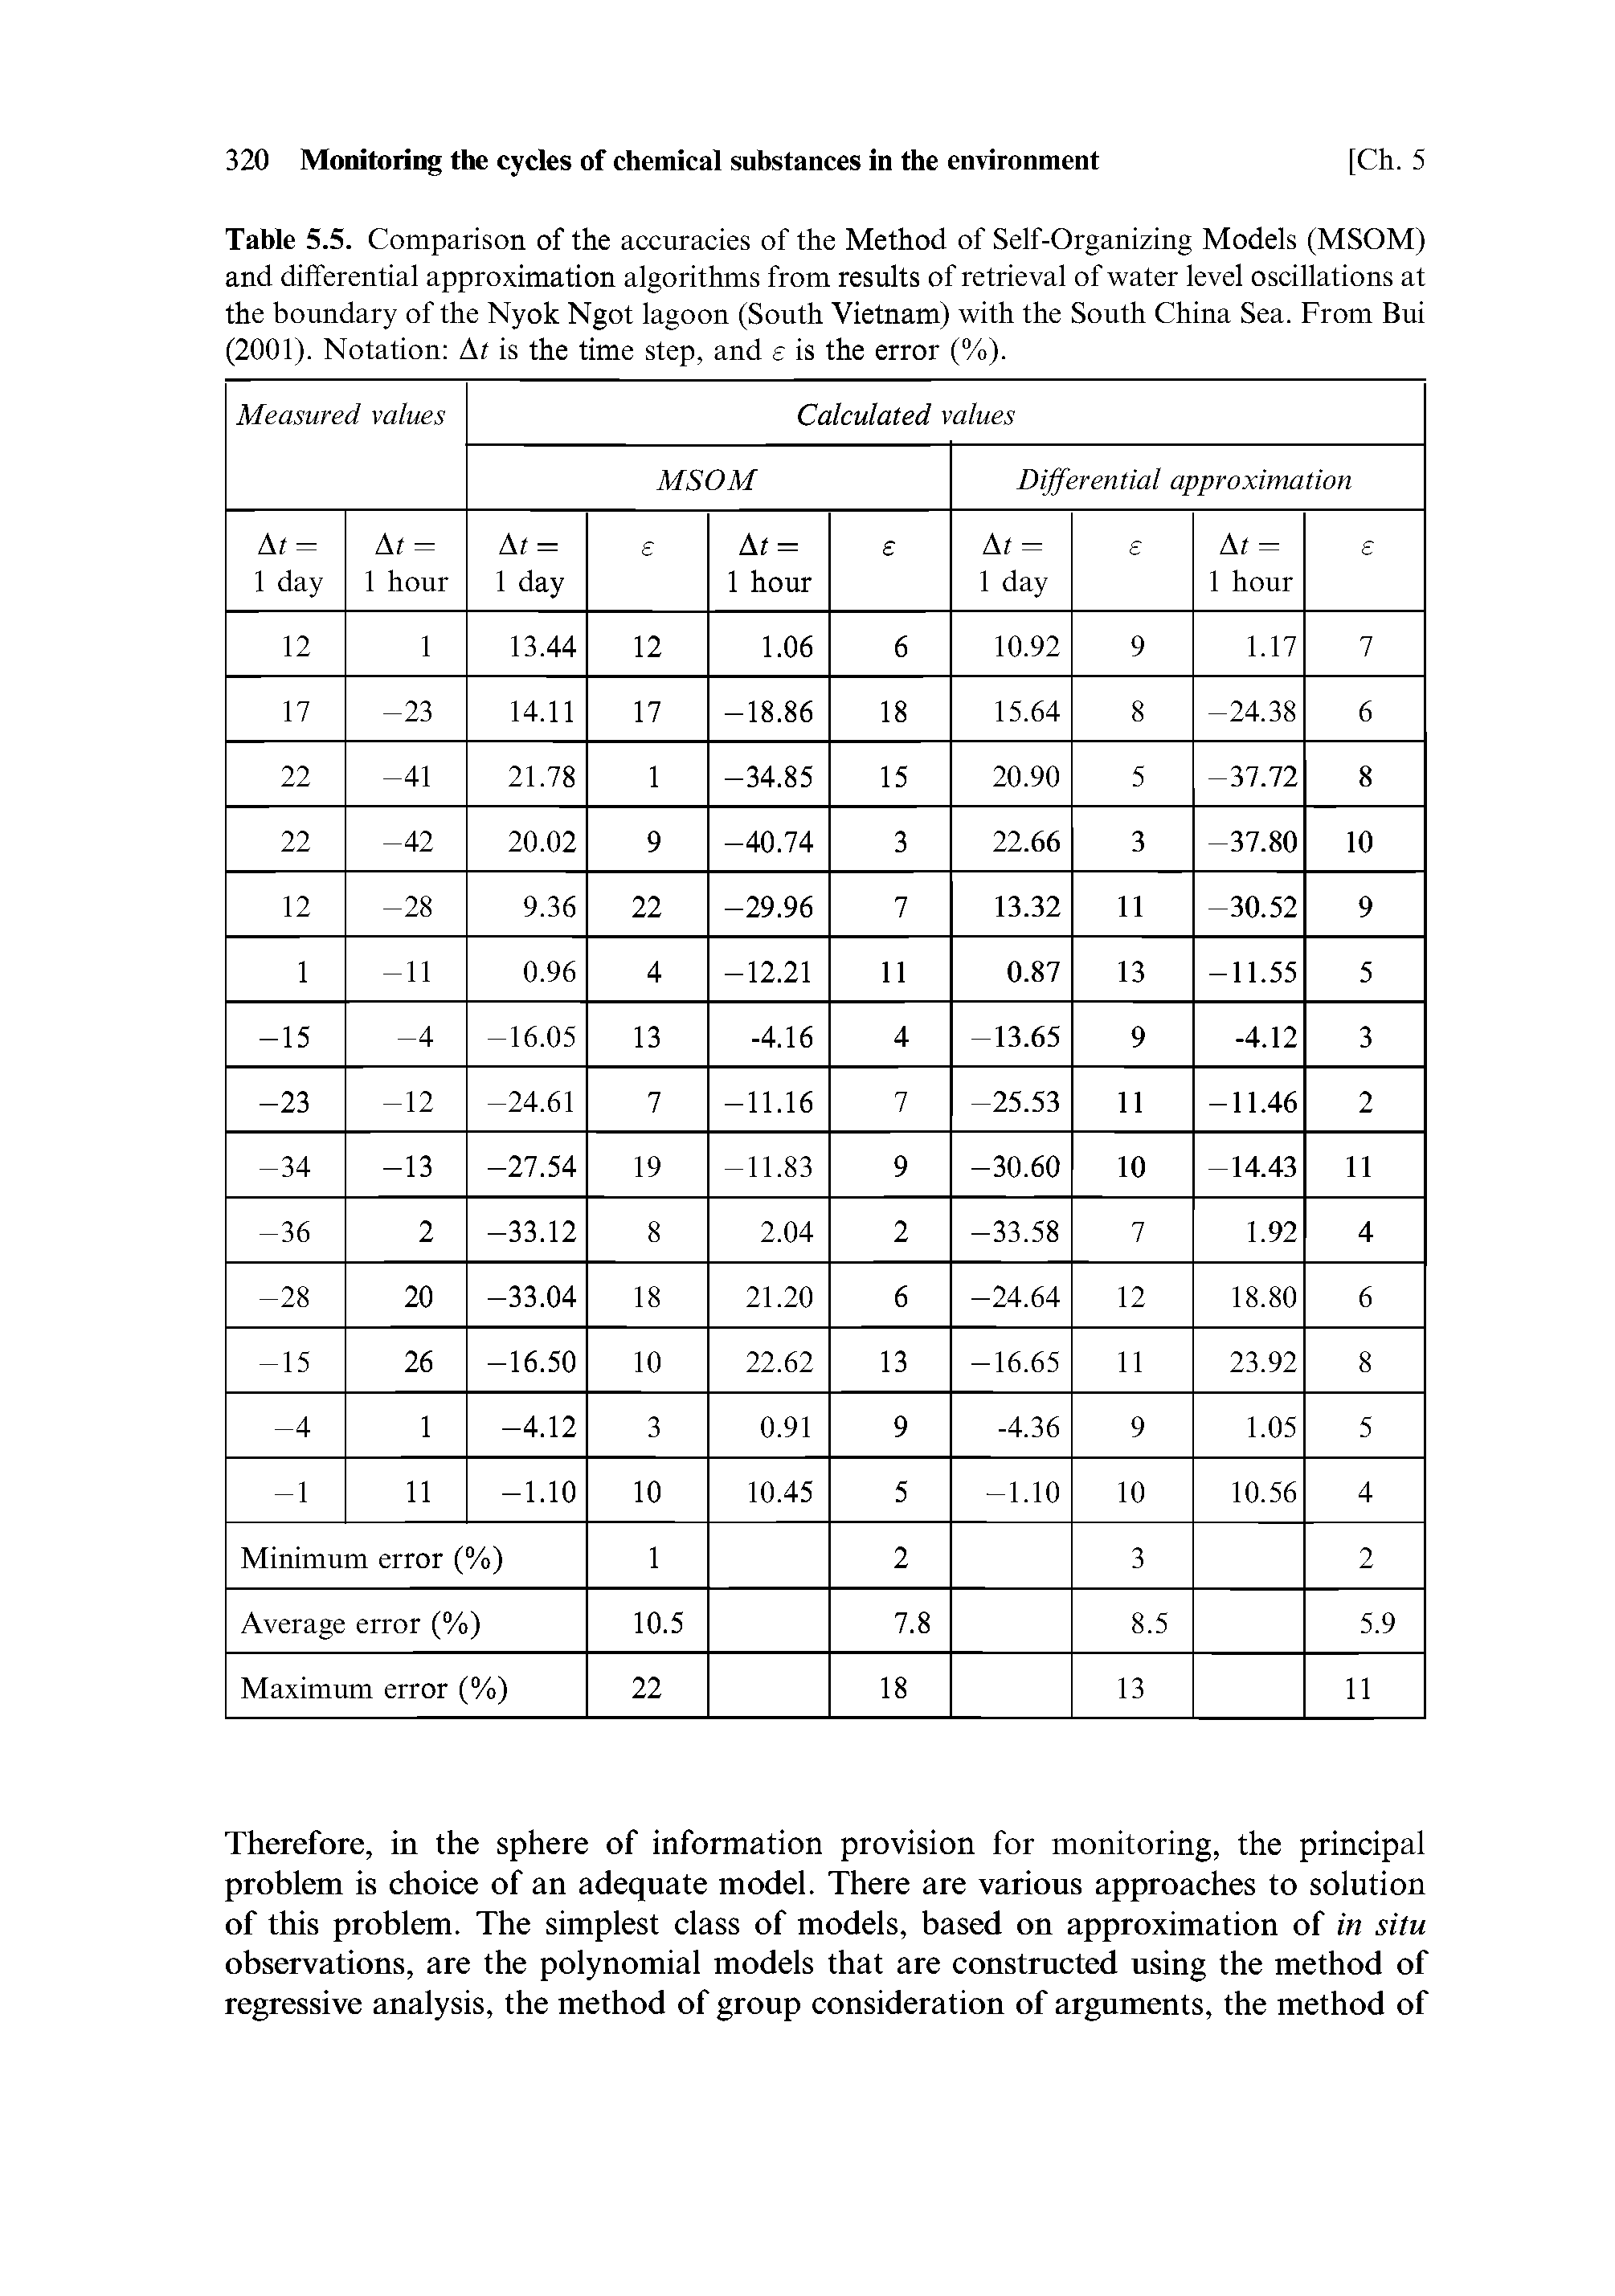 Table 5.5. Comparison of the accuracies of the Method of Self-Organizing Models (MSOM) and differential approximation algorithms from results of retrieval of water level oscillations at the boundary of the Nyok Ngot lagoon (South Vietnam) with the South China Sea. From Bui (2001). Notation At is the time step, and e is the error (%).